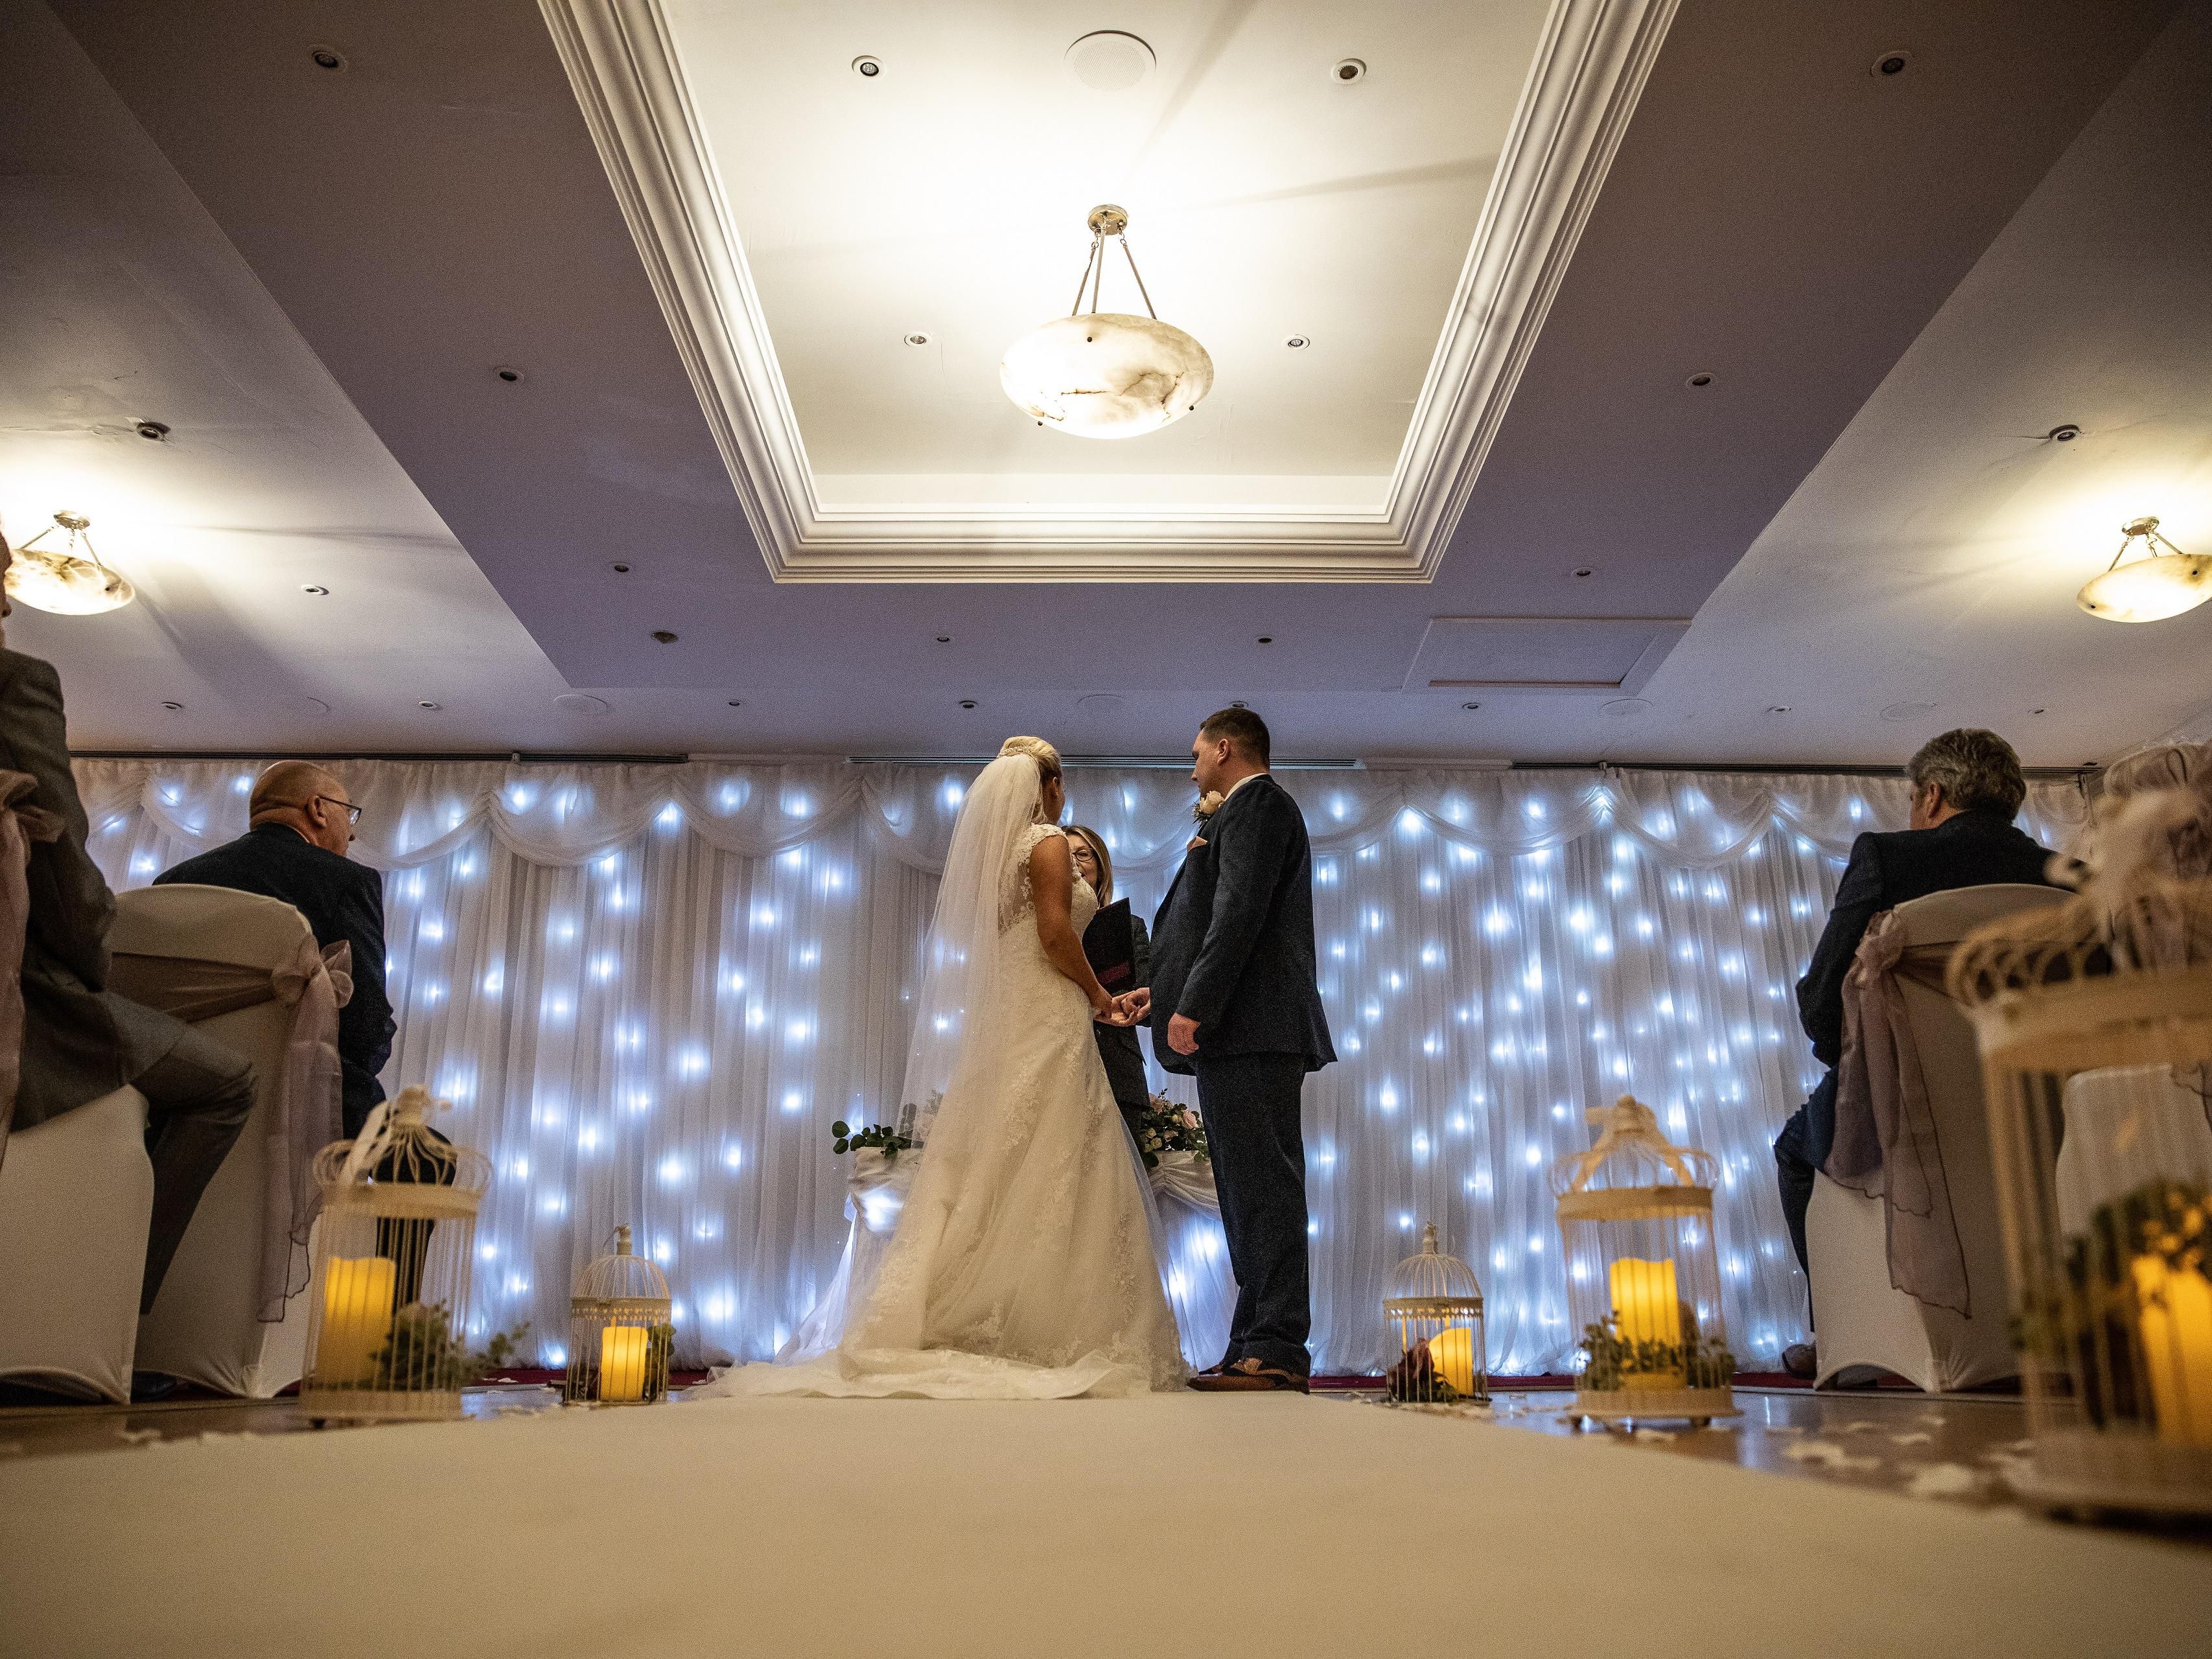 We offer a choice of wedding packages to suit any style and budget that can be added to and adapted to accommodate any special requests. Our inclusive packages take care of all of the details from a glamorous red carpet welcome complete with arrival drinks for you and your guests, to chair covers and centrepieces.